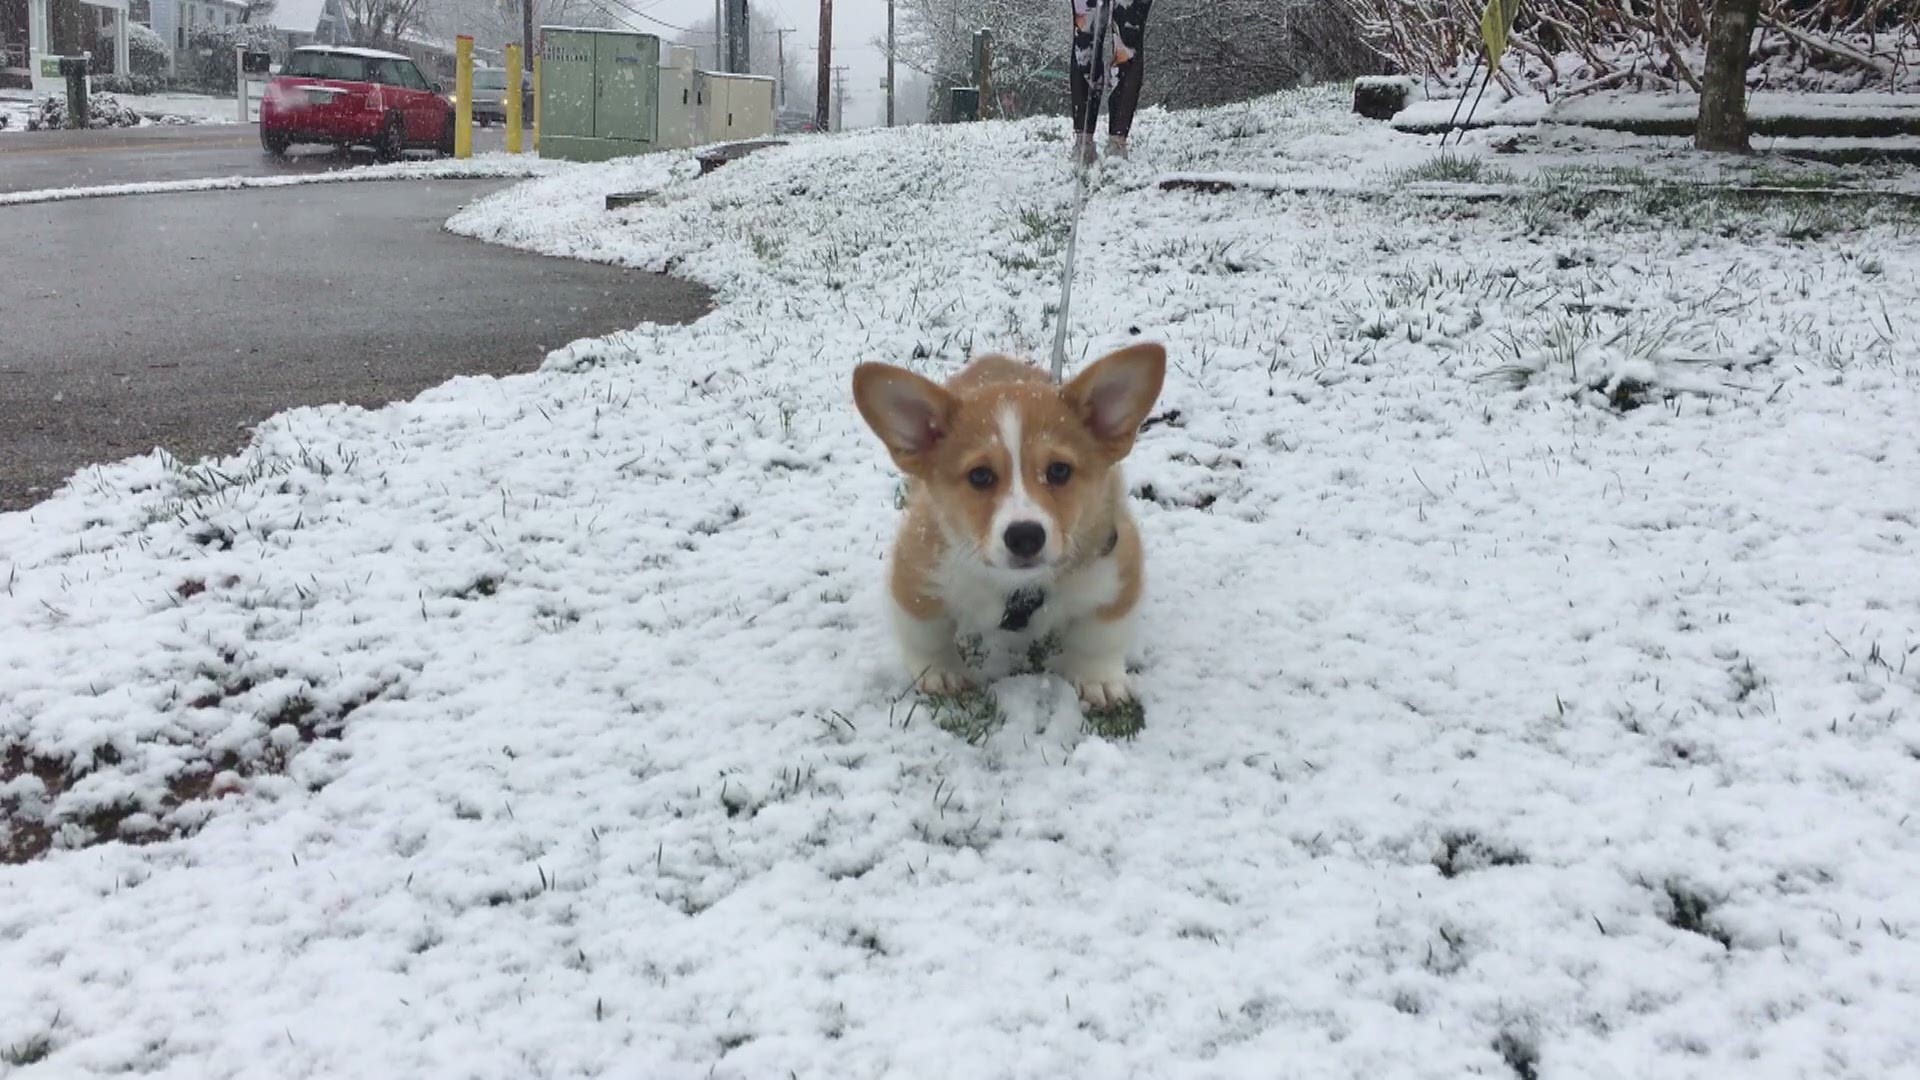 Bowie the Corgi pup is enjoying his first snow fall in East Tennessee!